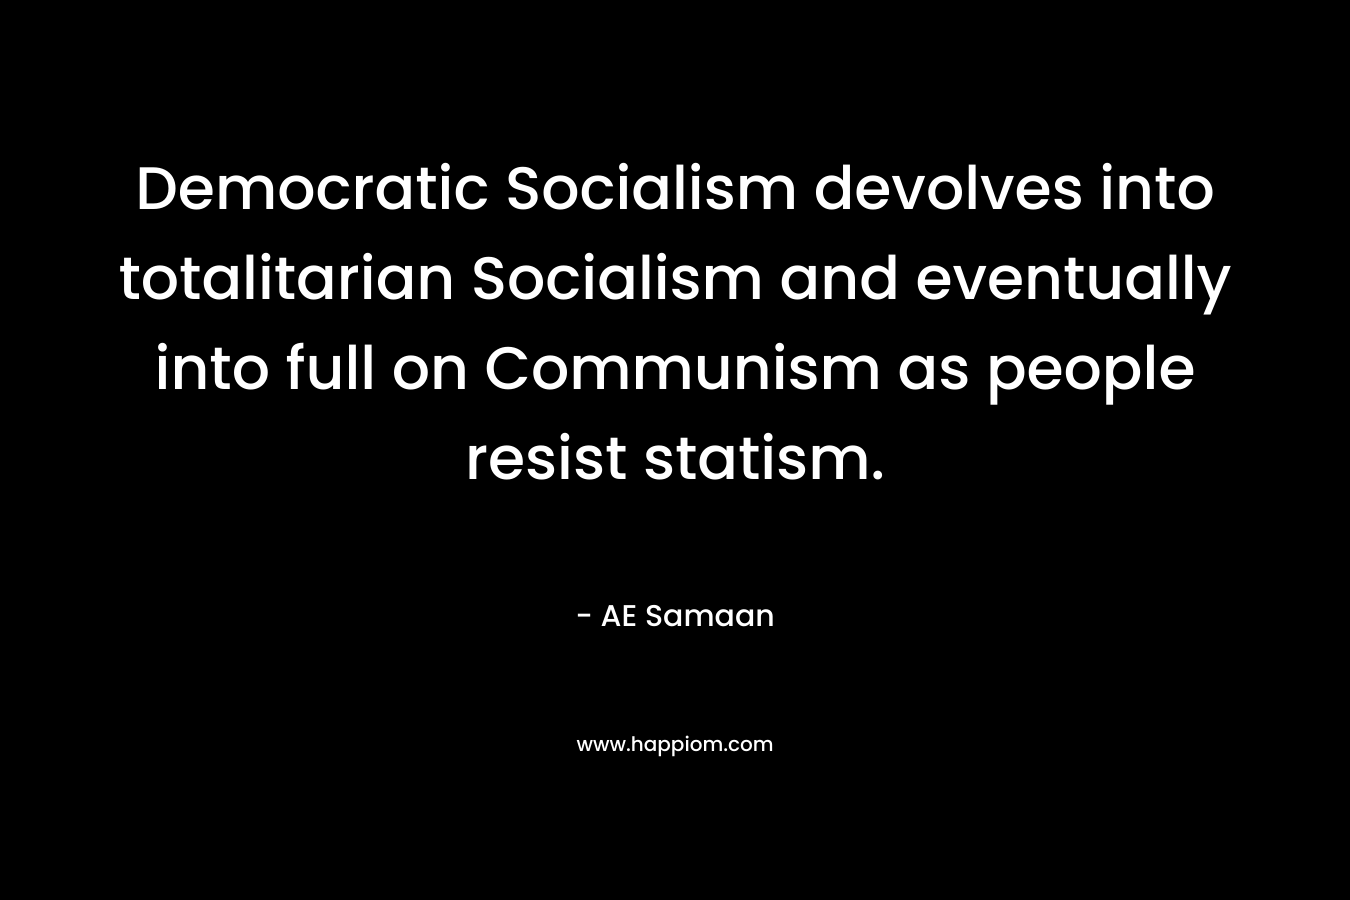 Democratic Socialism devolves into totalitarian Socialism and eventually into full on Communism as people resist statism. – AE Samaan